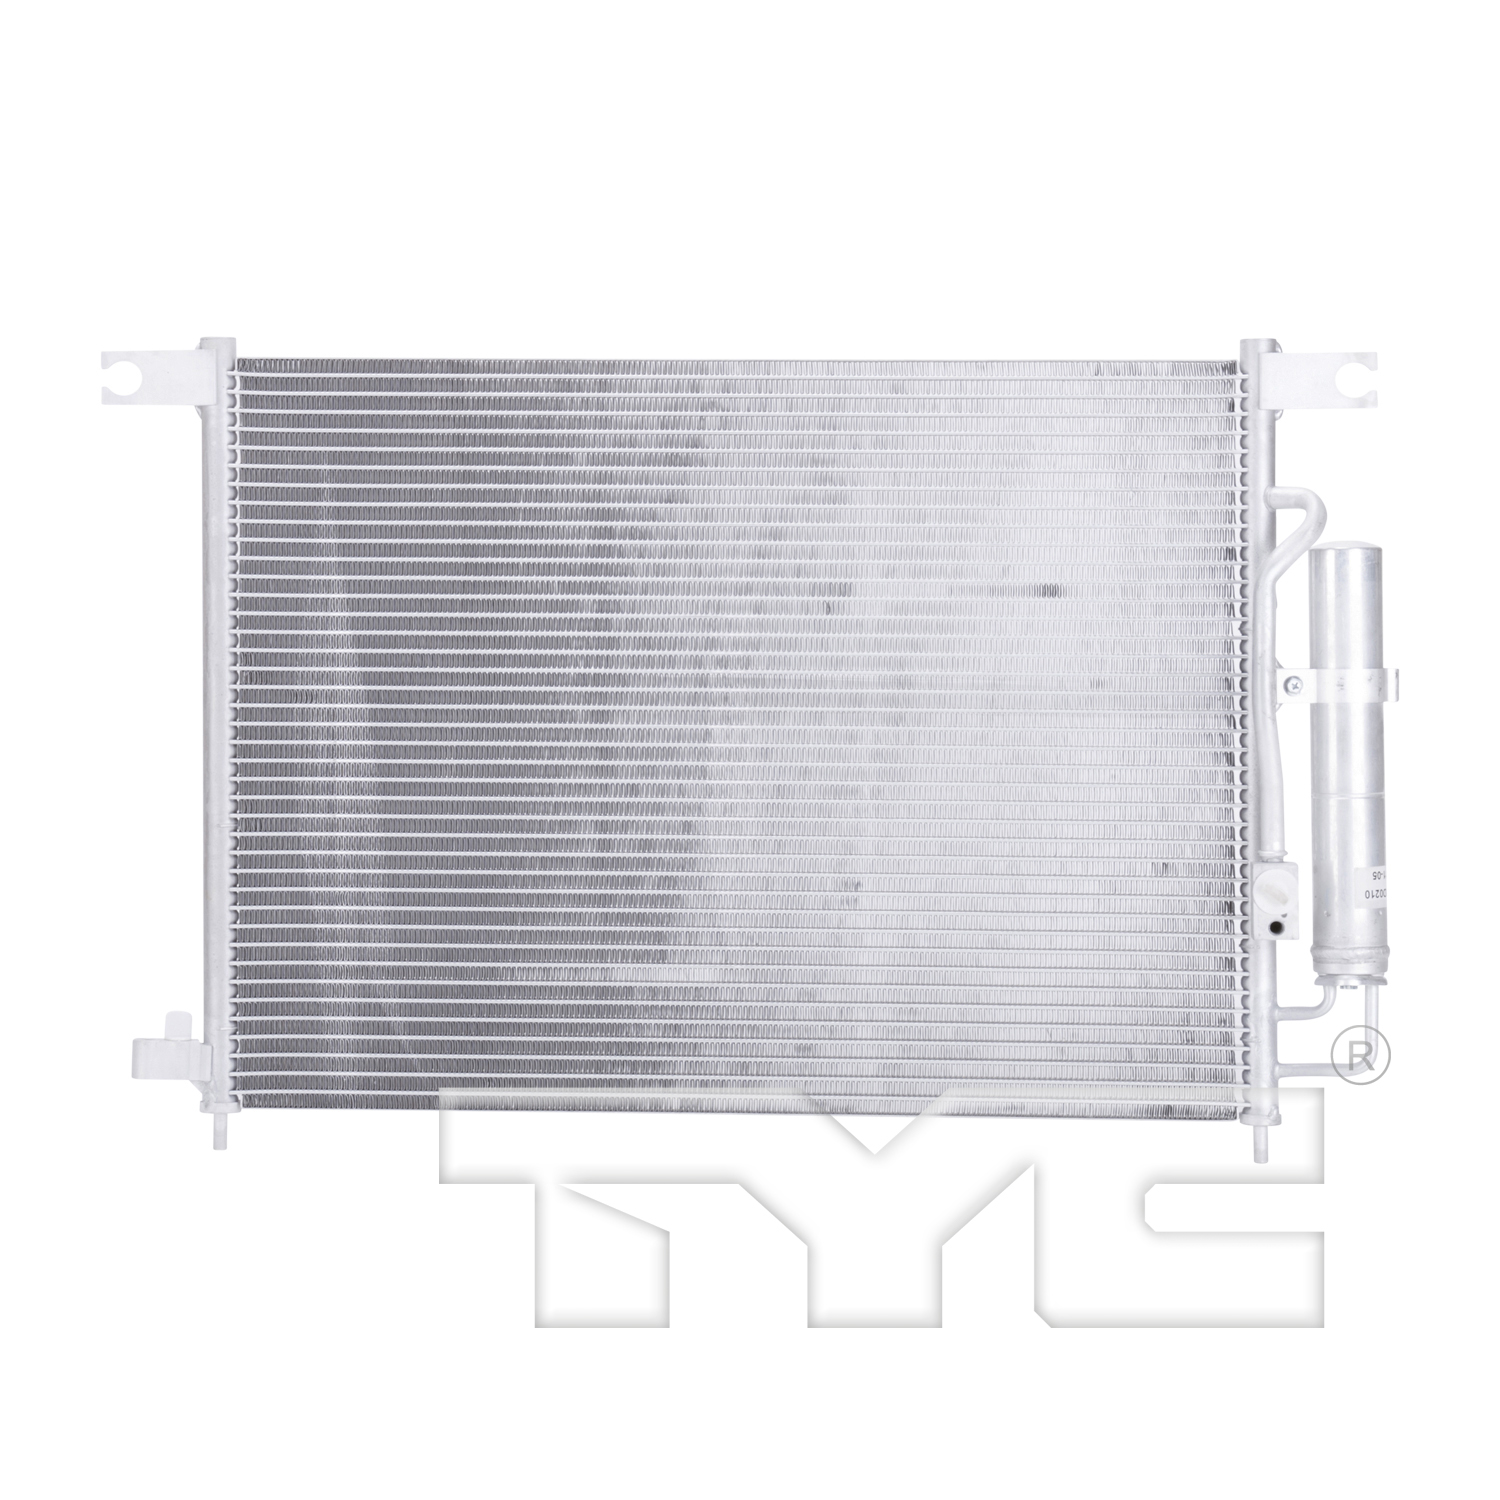 Aftermarket AC CONDENSERS for CHEVROLET - AVEO, AVEO,04-08,Air conditioning condenser